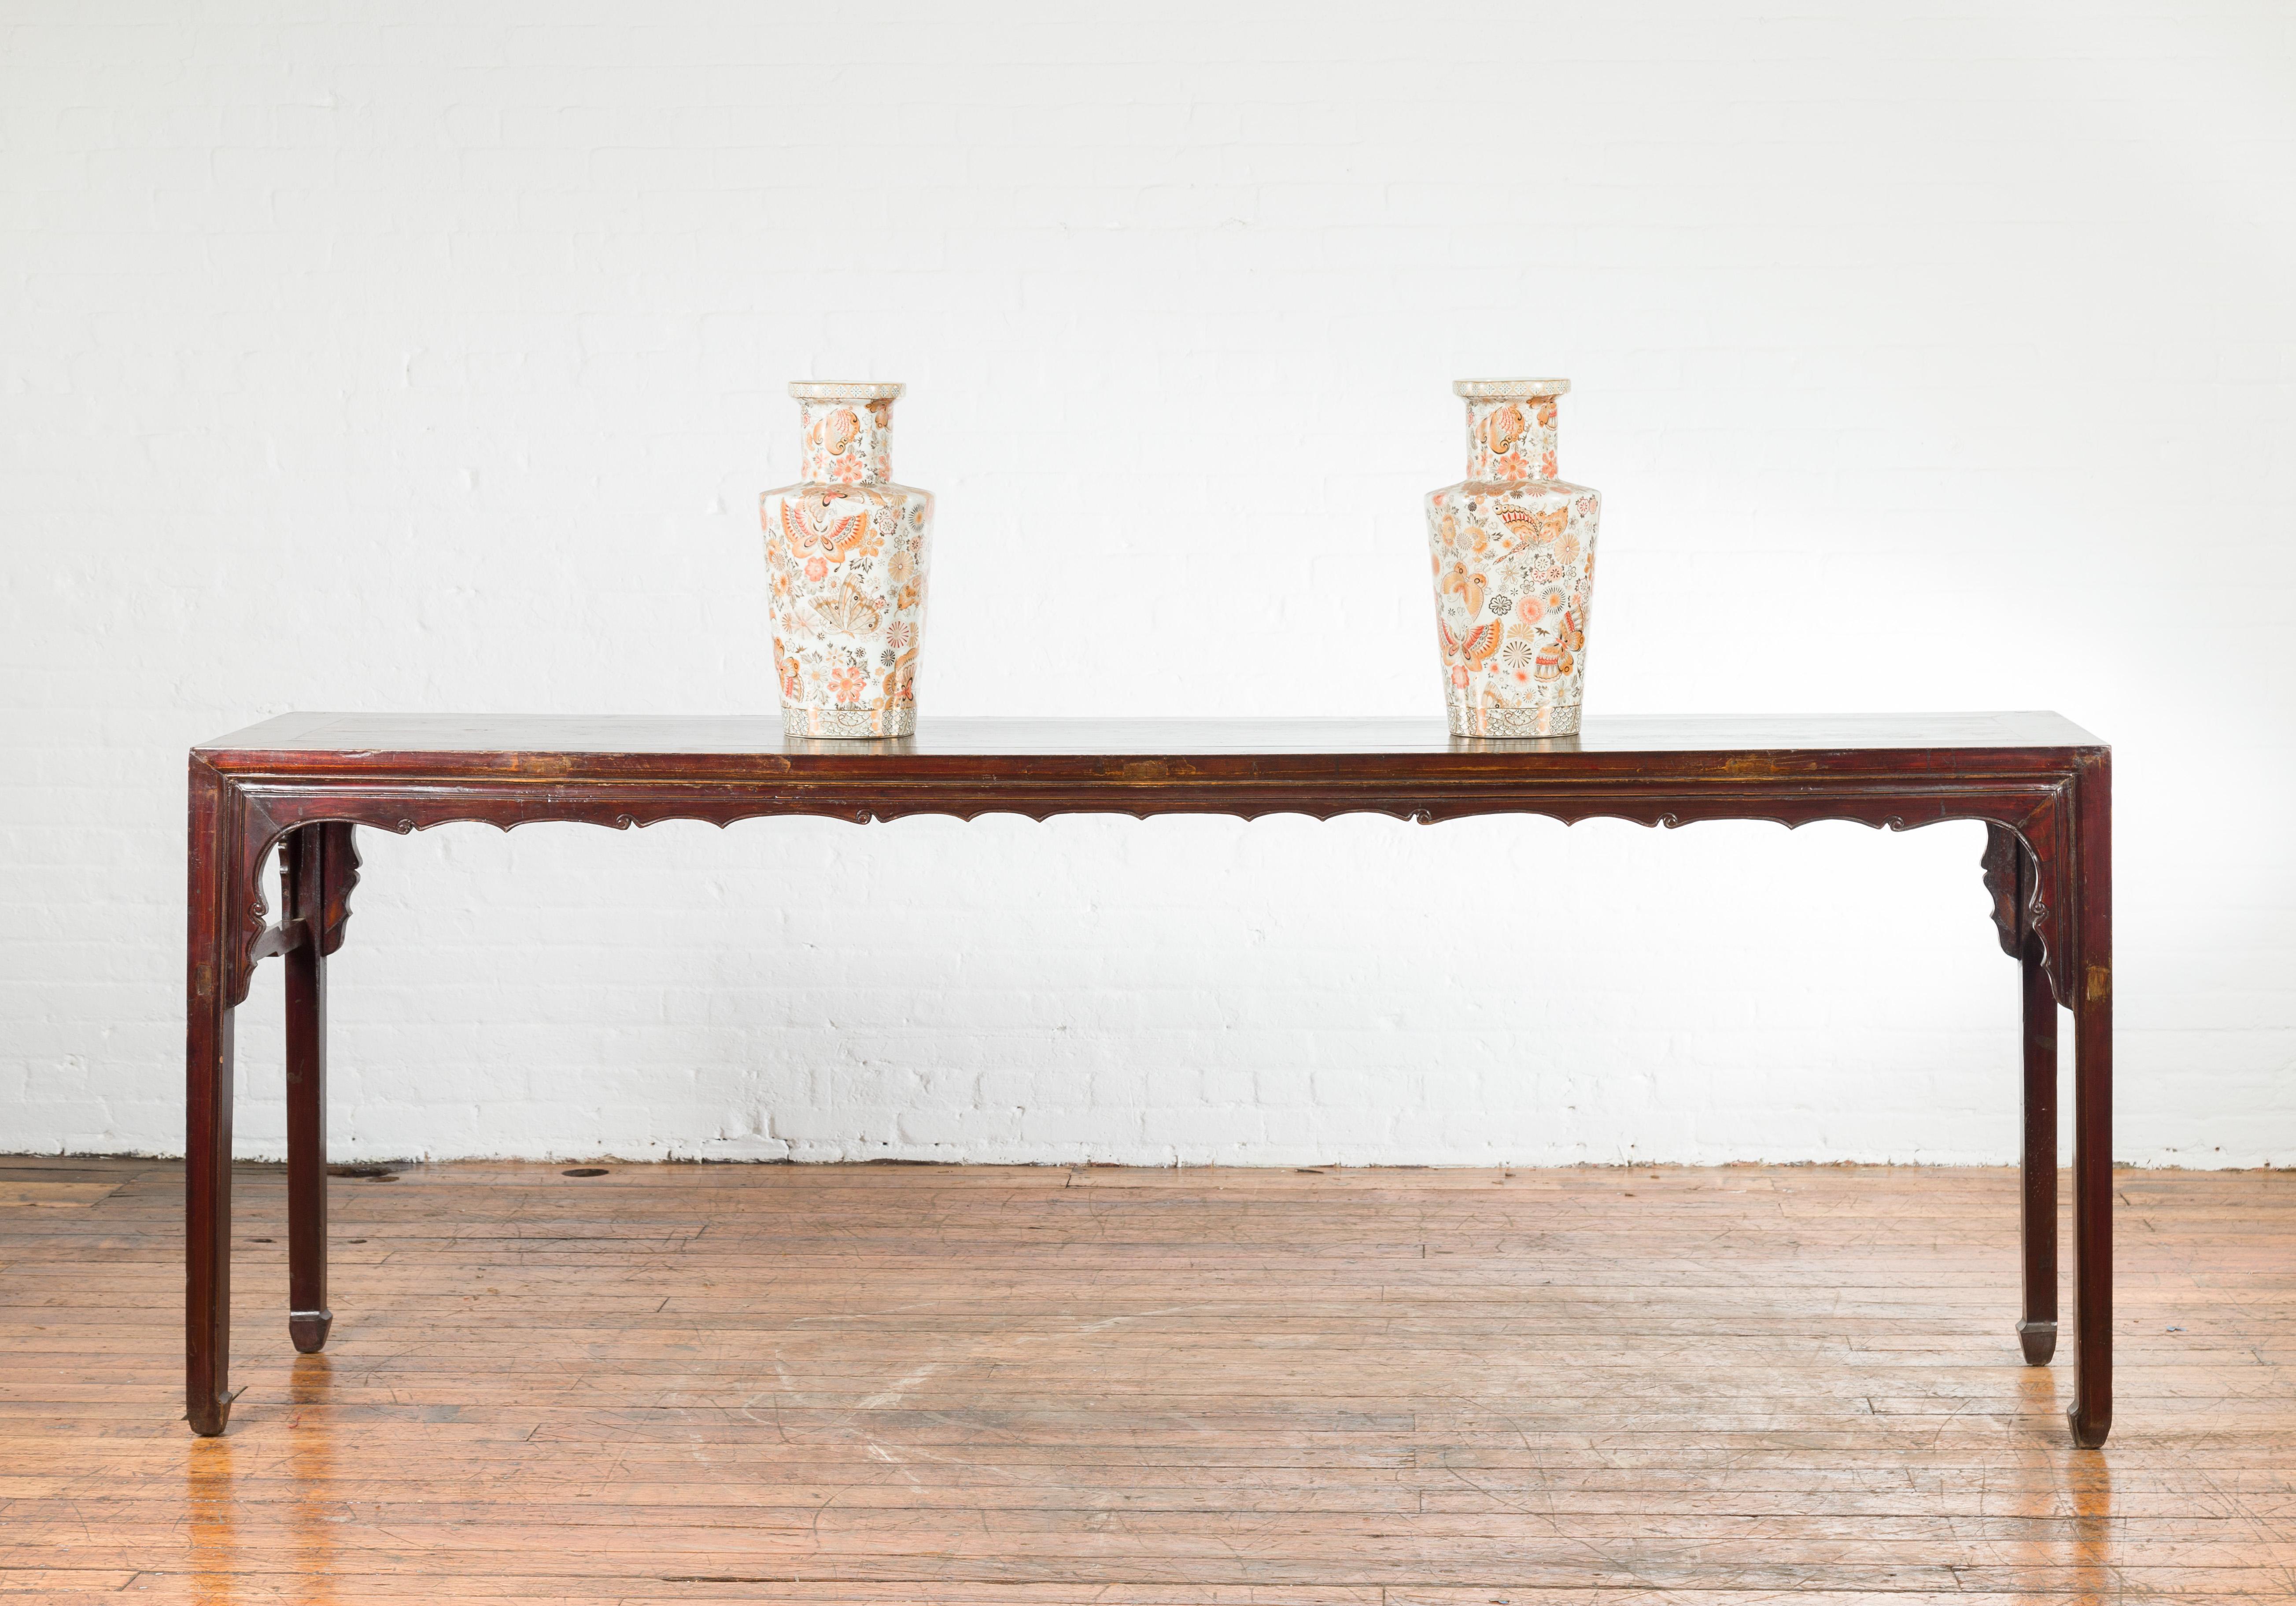 Carved Chinese 19th Century Qing Dynasty Altar Console Table with Reddish Brown Patina